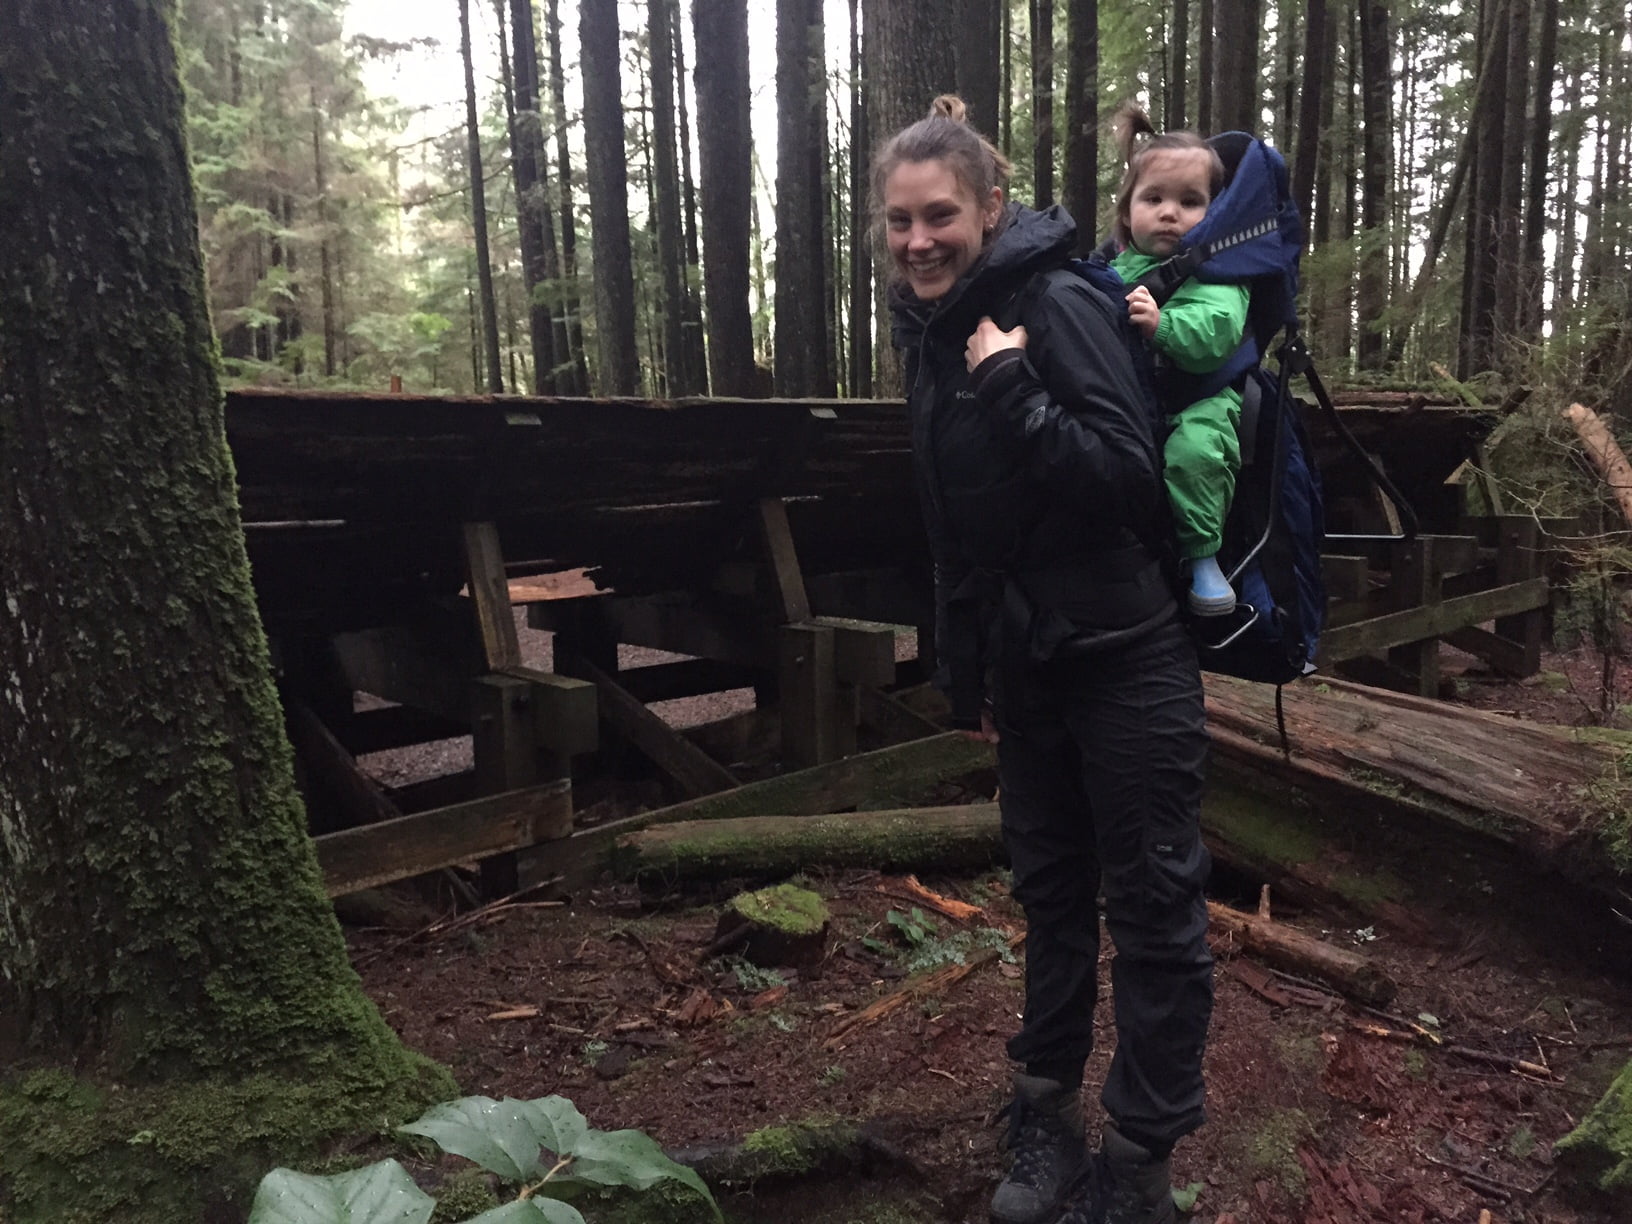 Woman hiking with a baby on her back who knows how to have a successful family hiking trip